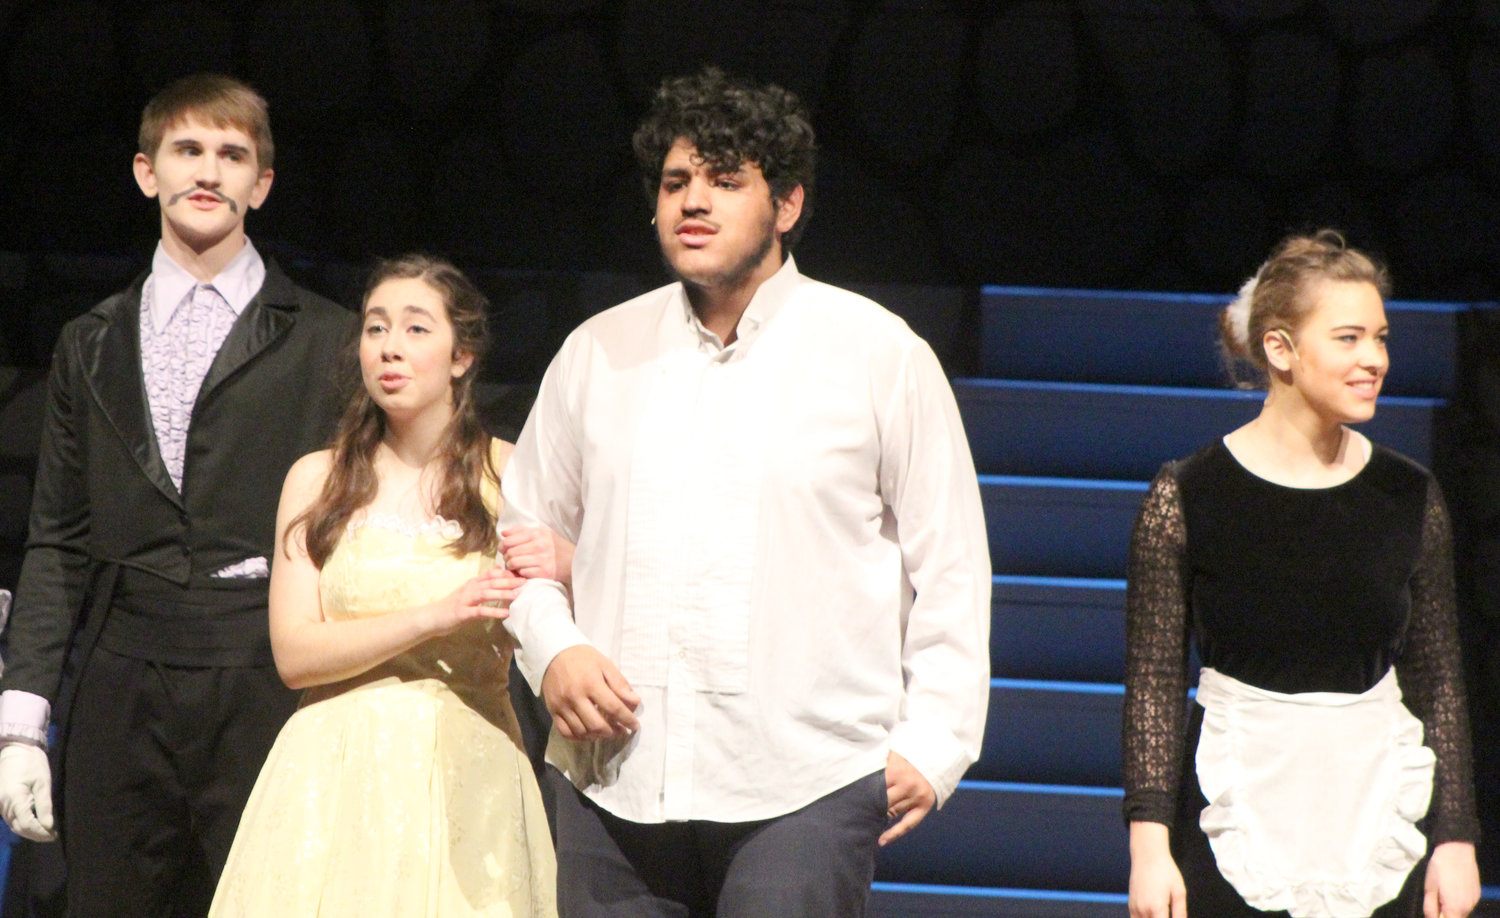 Hillcrest Academy presented the musical Beauty and the Beast Nov. 9 and 10.